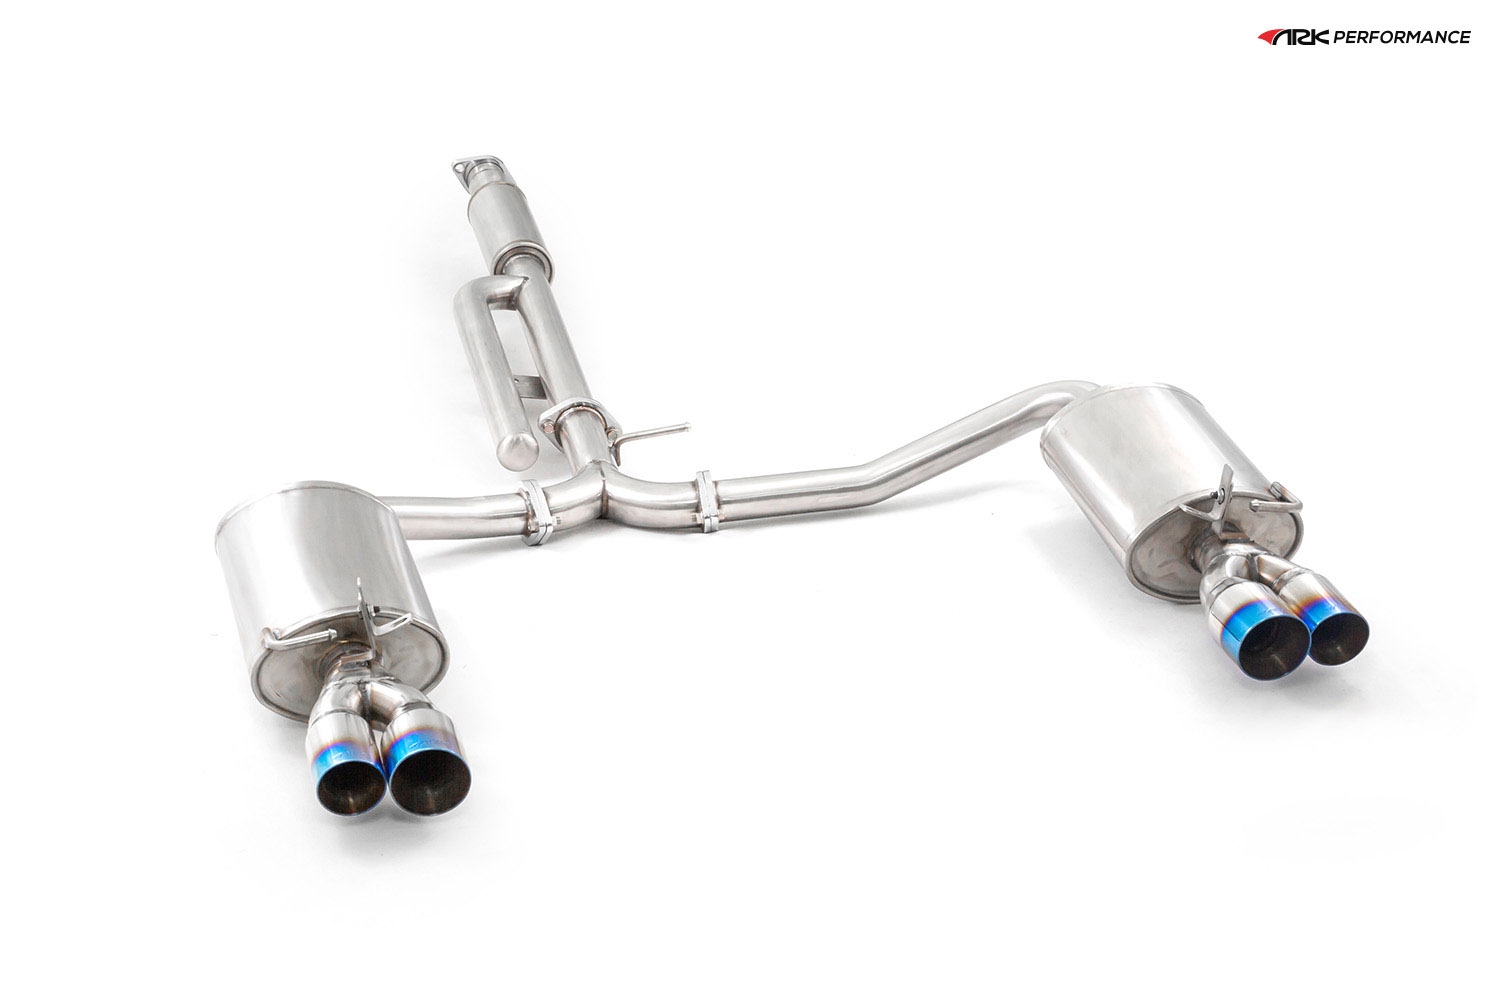 Ark Performance Stainless Steel DT-S Cat-Back Exhaust System 2.25 to 2.5in Pipe w/ 3.5 / 2.5 Burnt Dual Tip, Dual Exit - Kia Optima / K5 11-13 2.0T, 2.4L I4